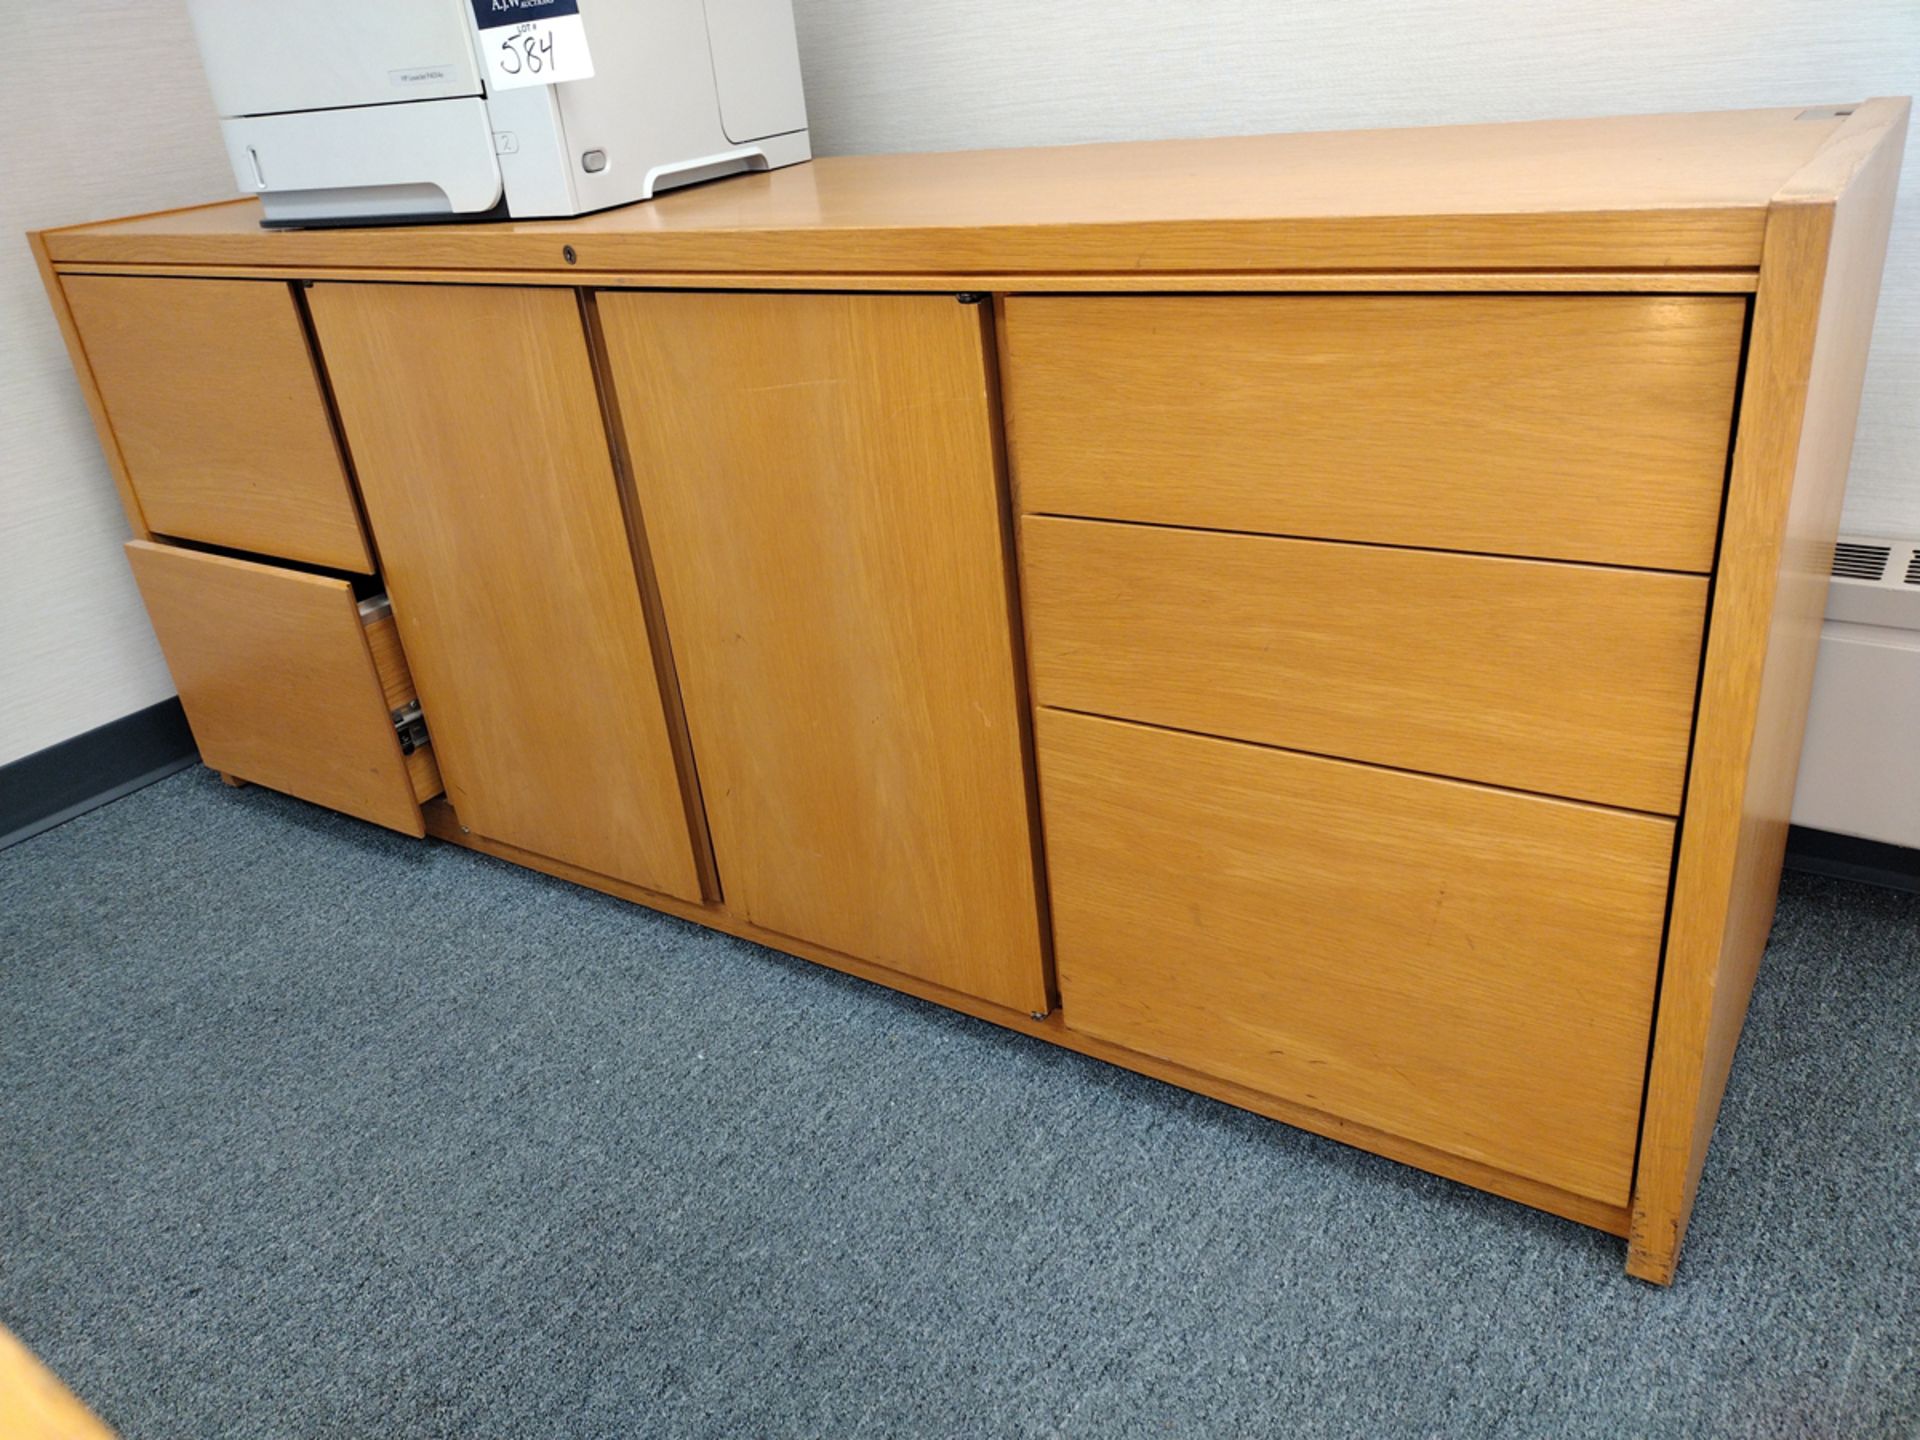 Group of Office Furniture Throughout Rooms - Image 9 of 14